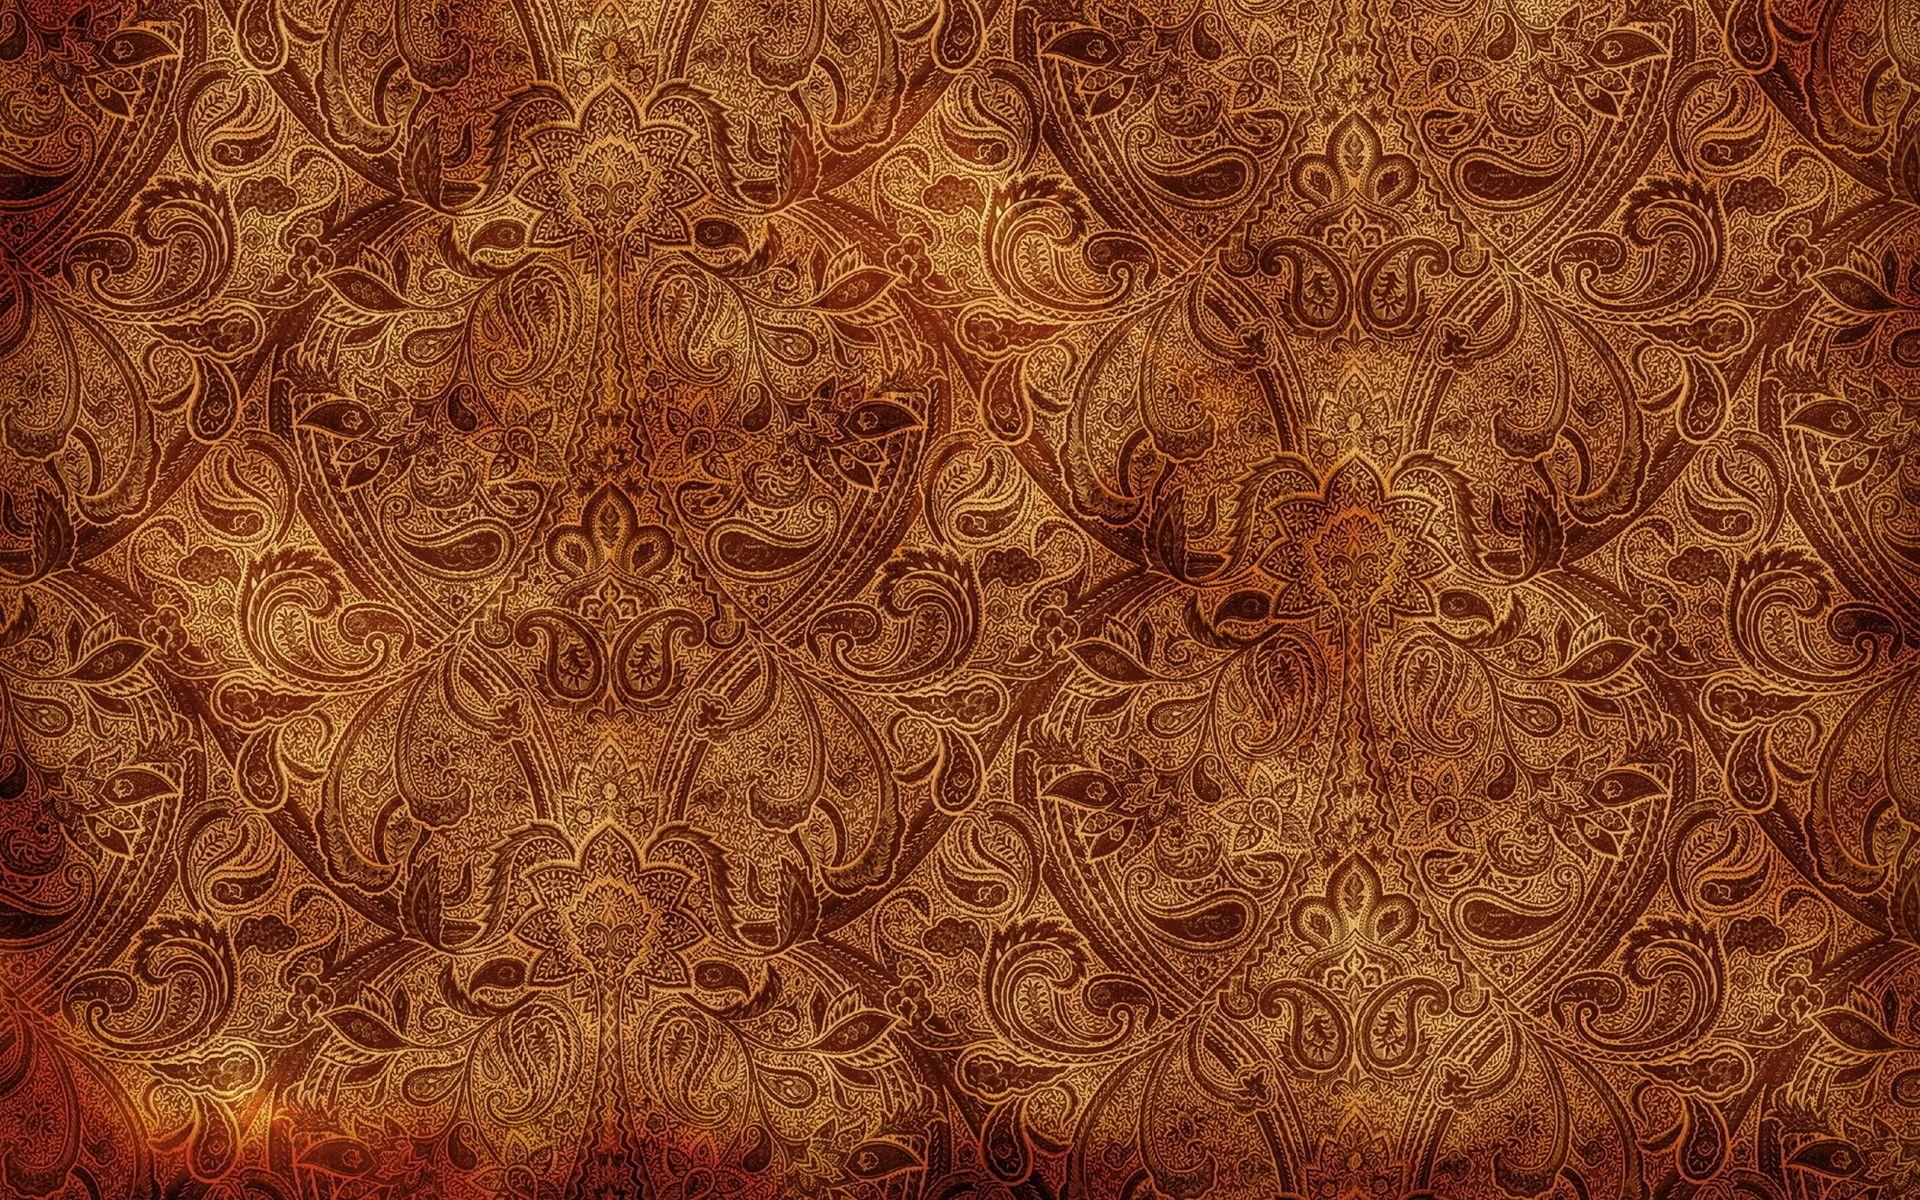 Medieval backgroundDownload free stunning full HD background